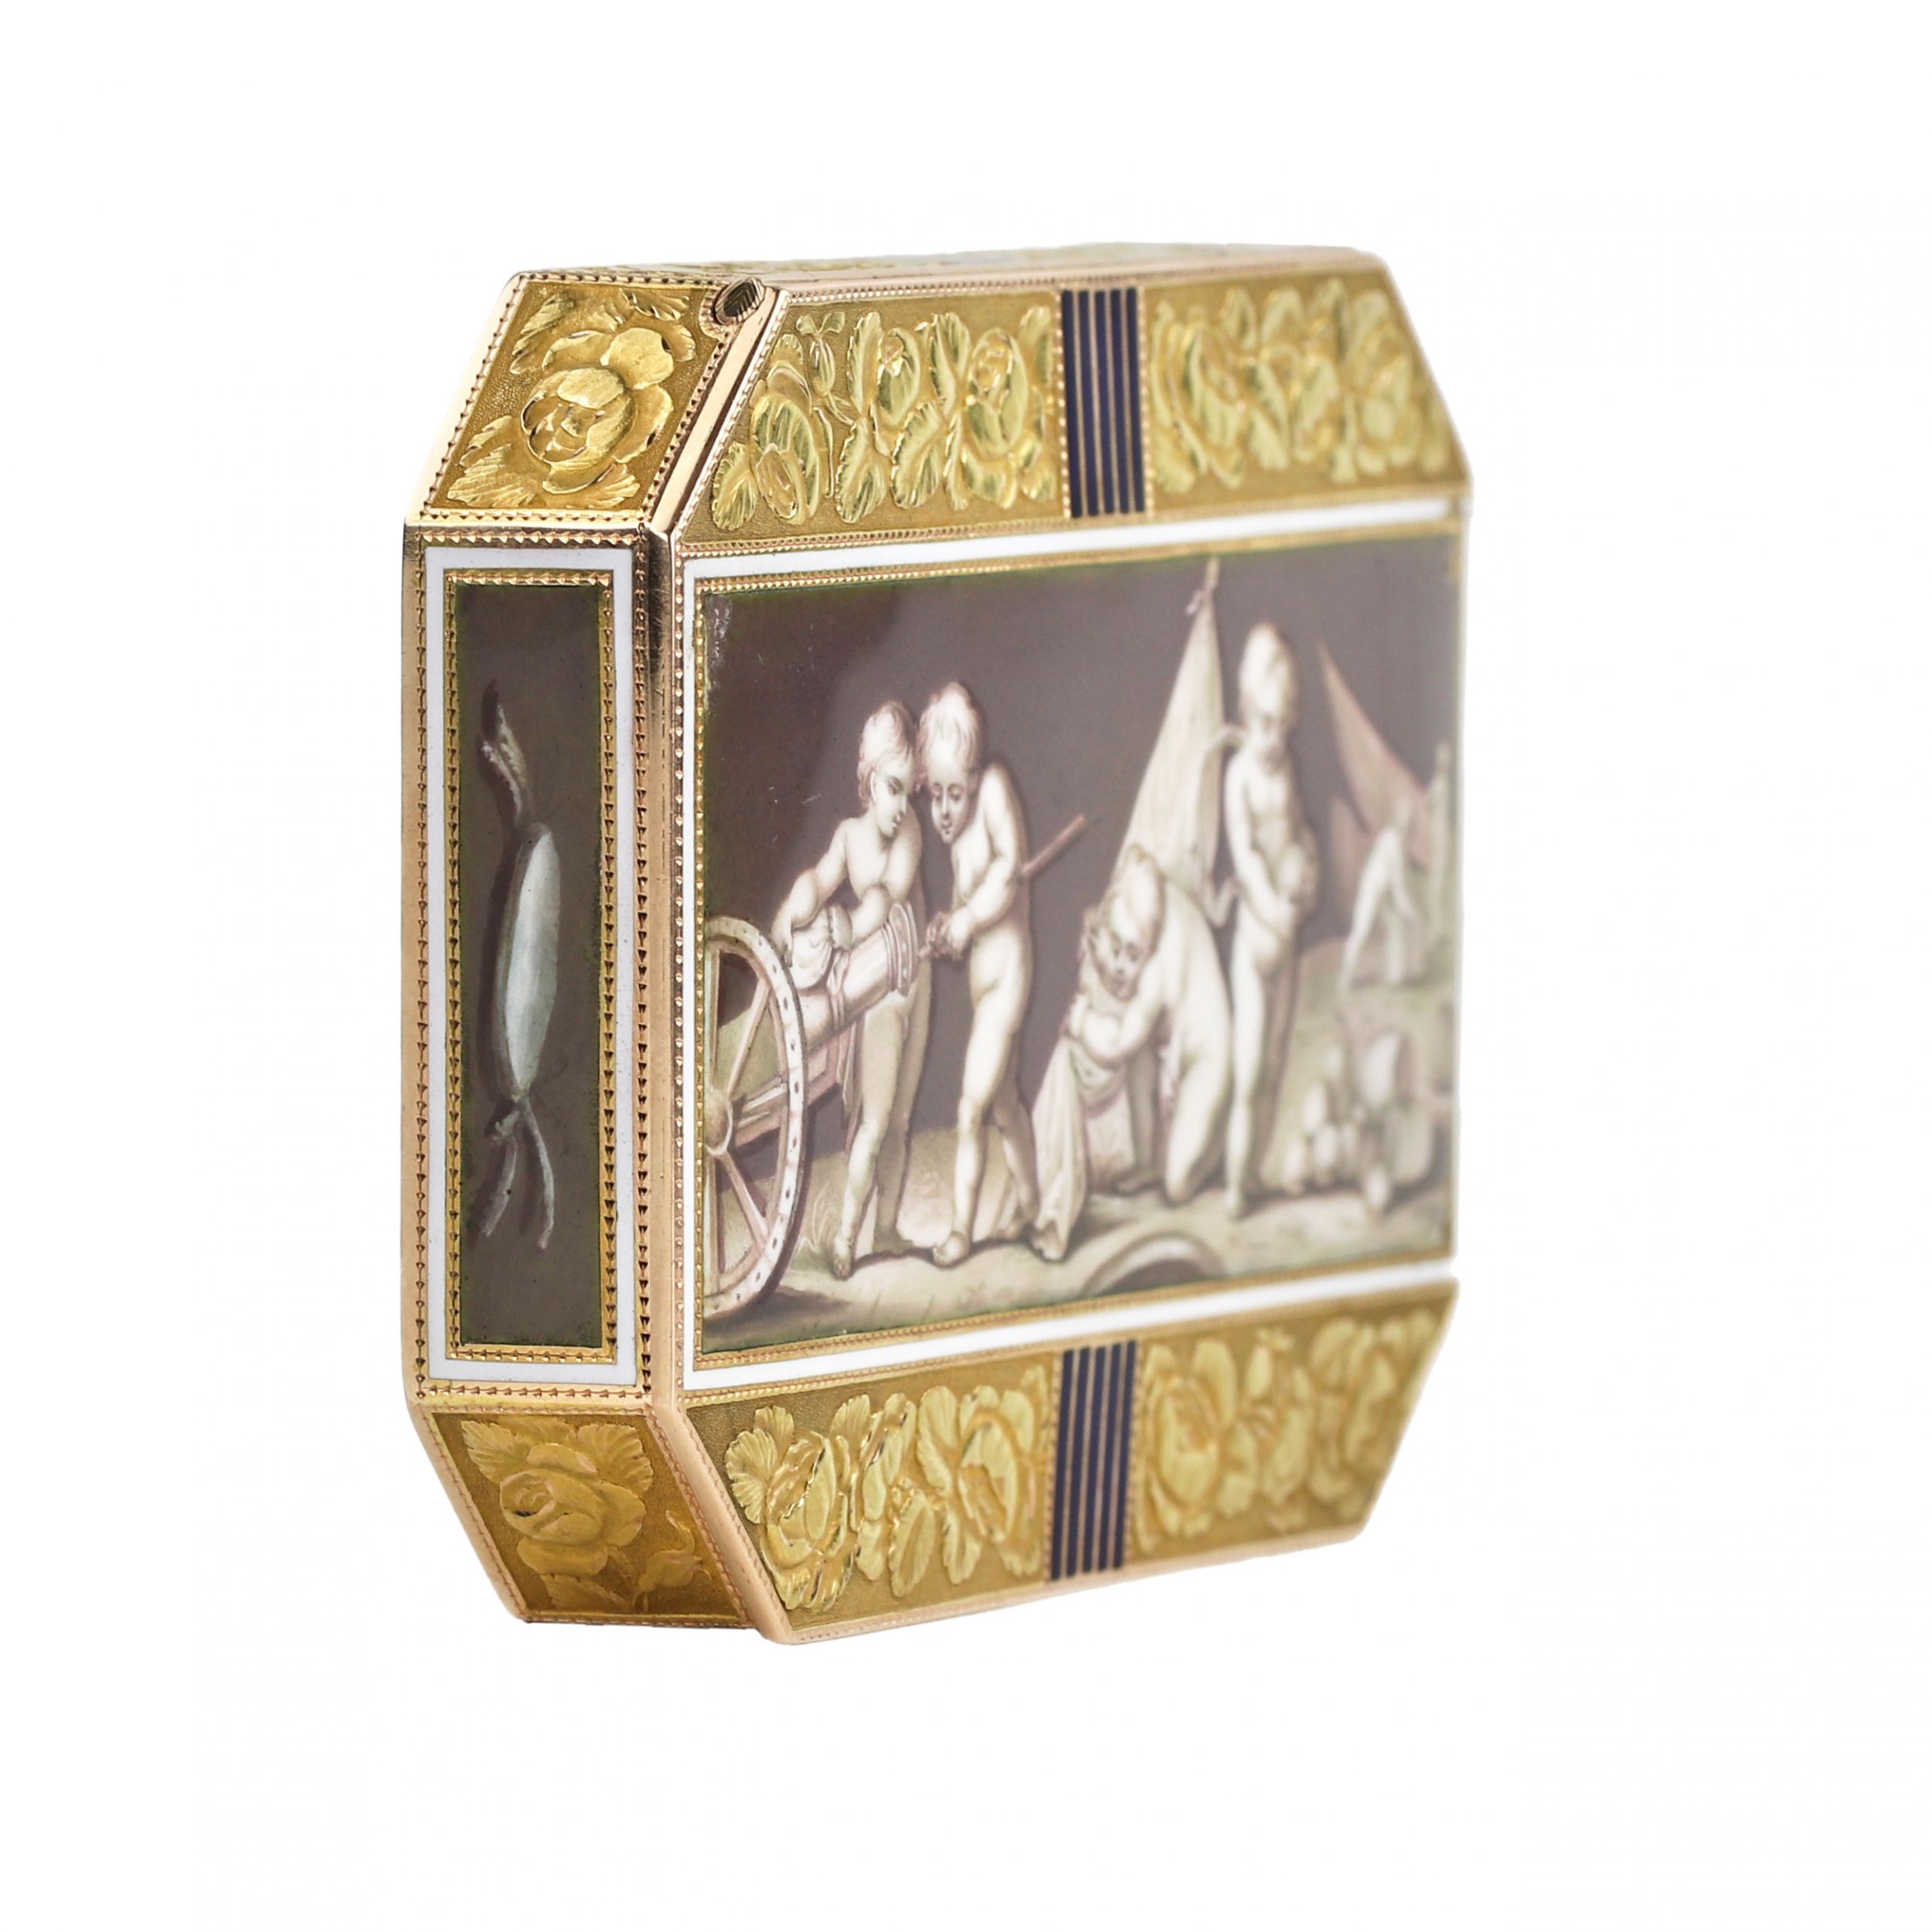 Golden, French snuffbox with enamel grisaille, Empire period. - Image 8 of 9